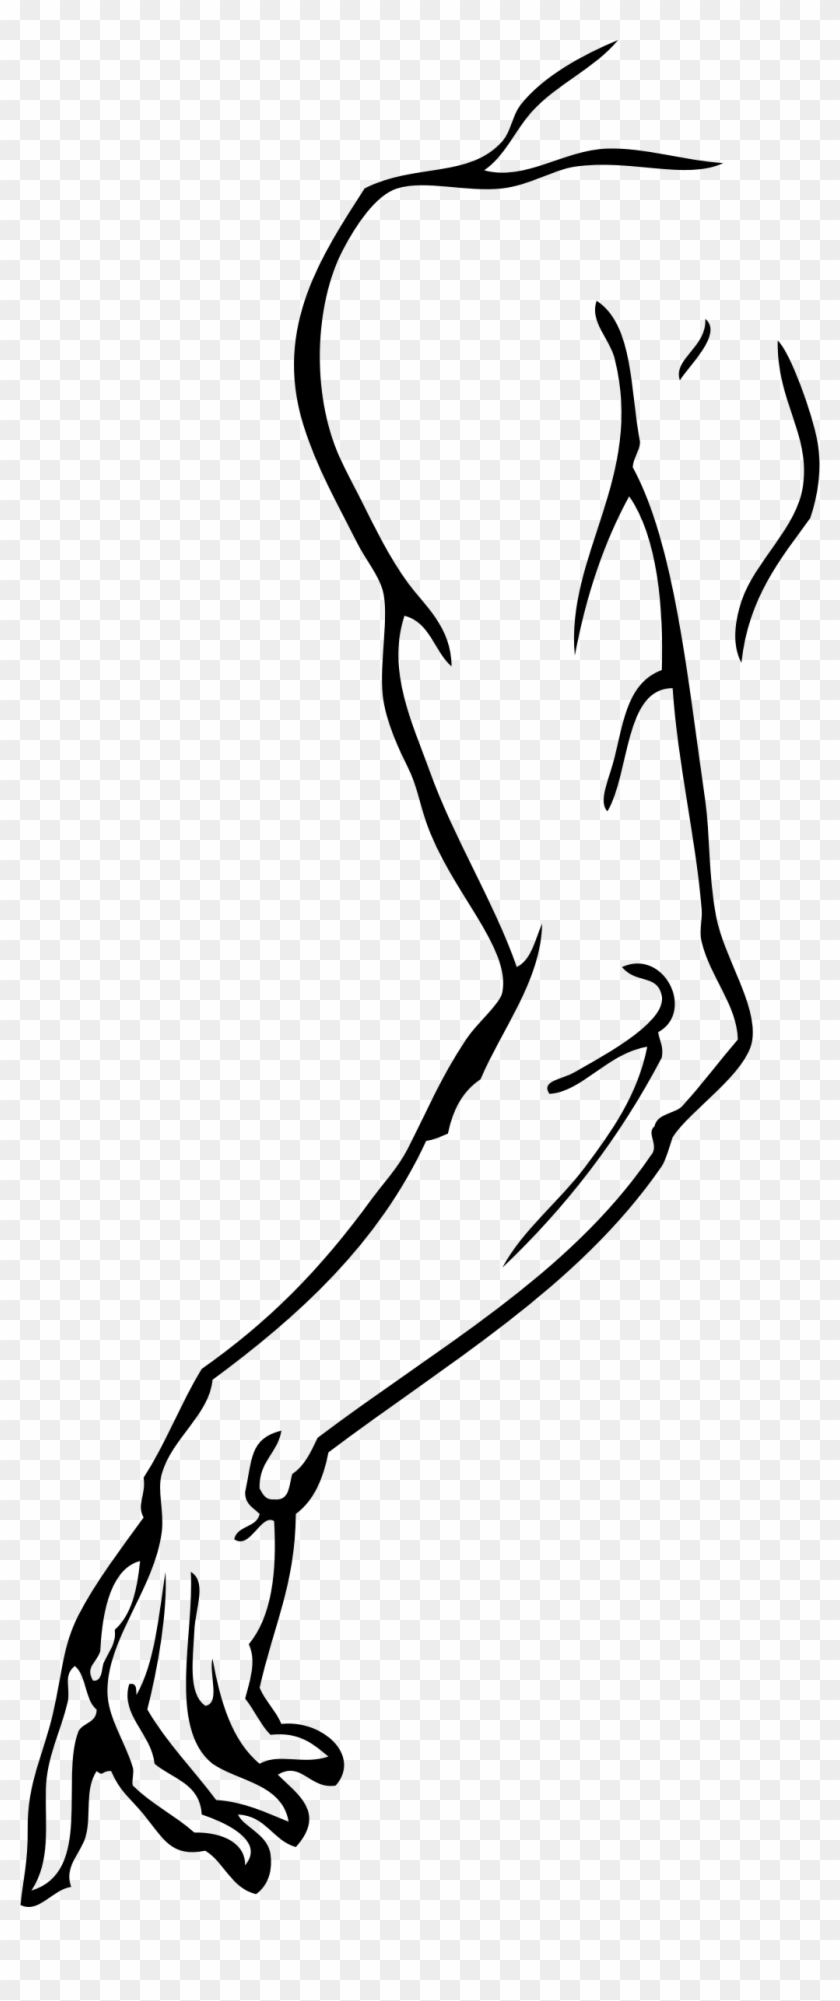 Left Arm Clipart - Arm Black And White #665808